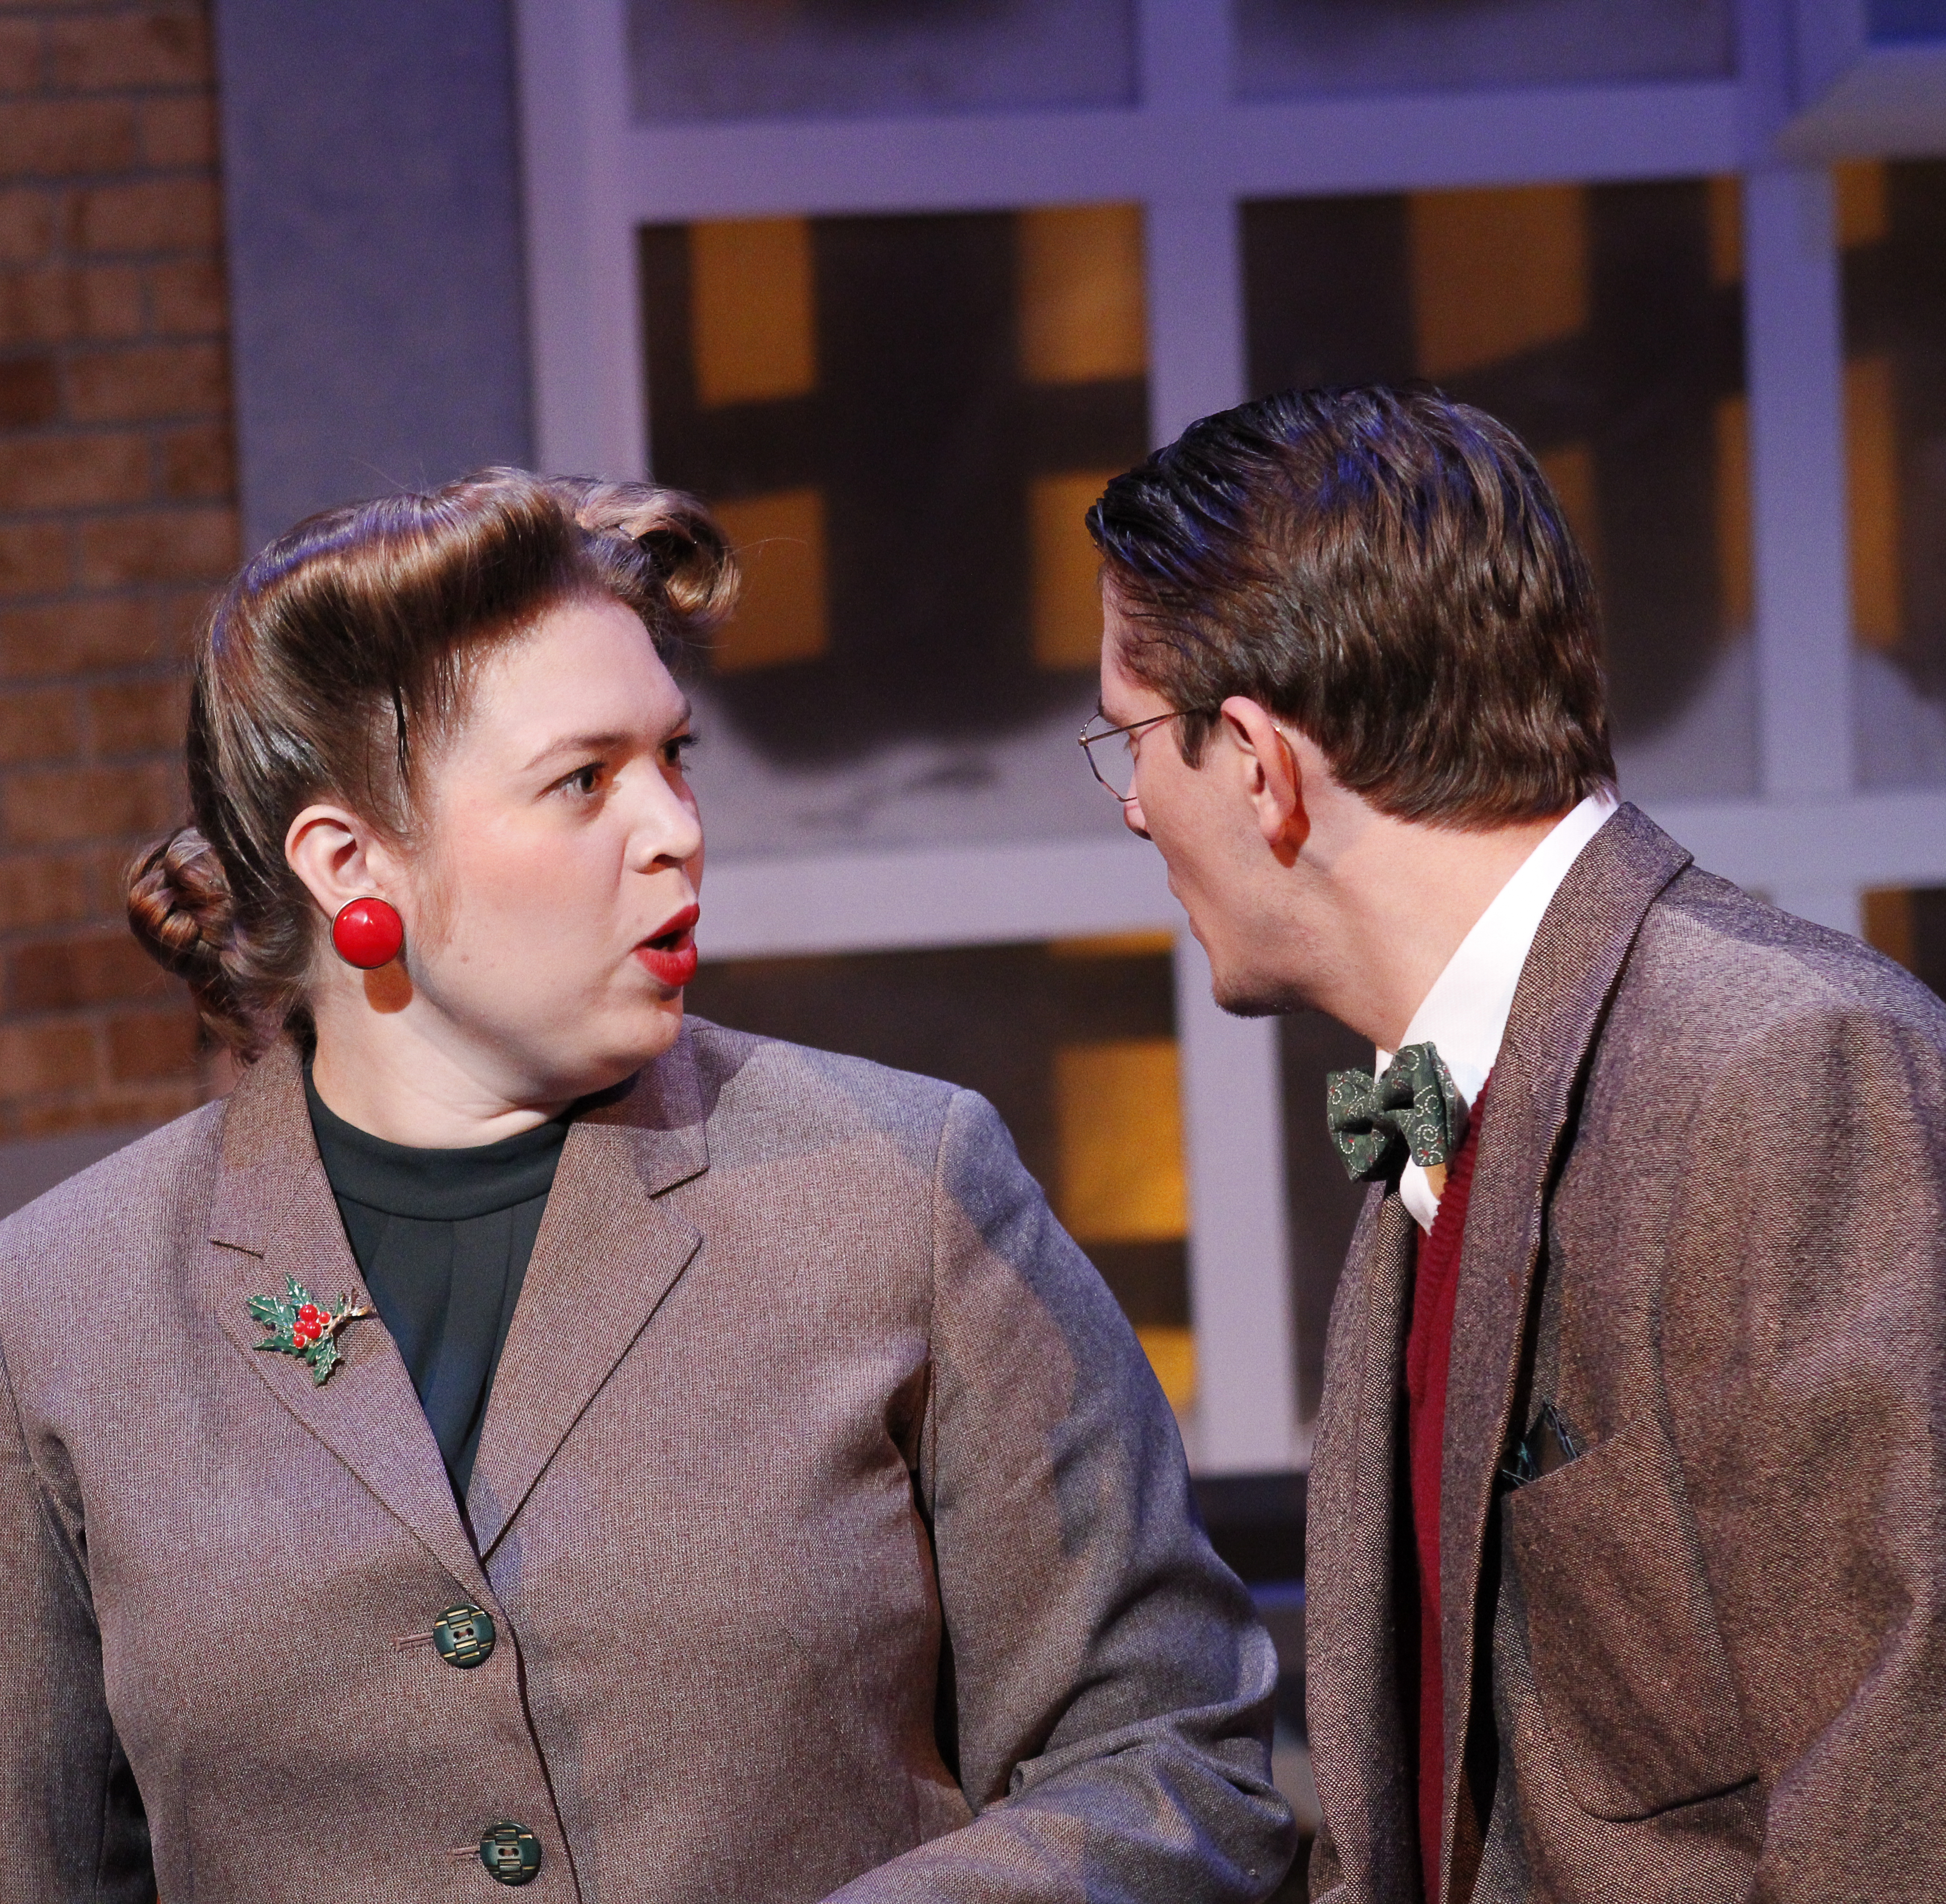 Student actors performed with passion in the production of “It’s a Wonderful Life”